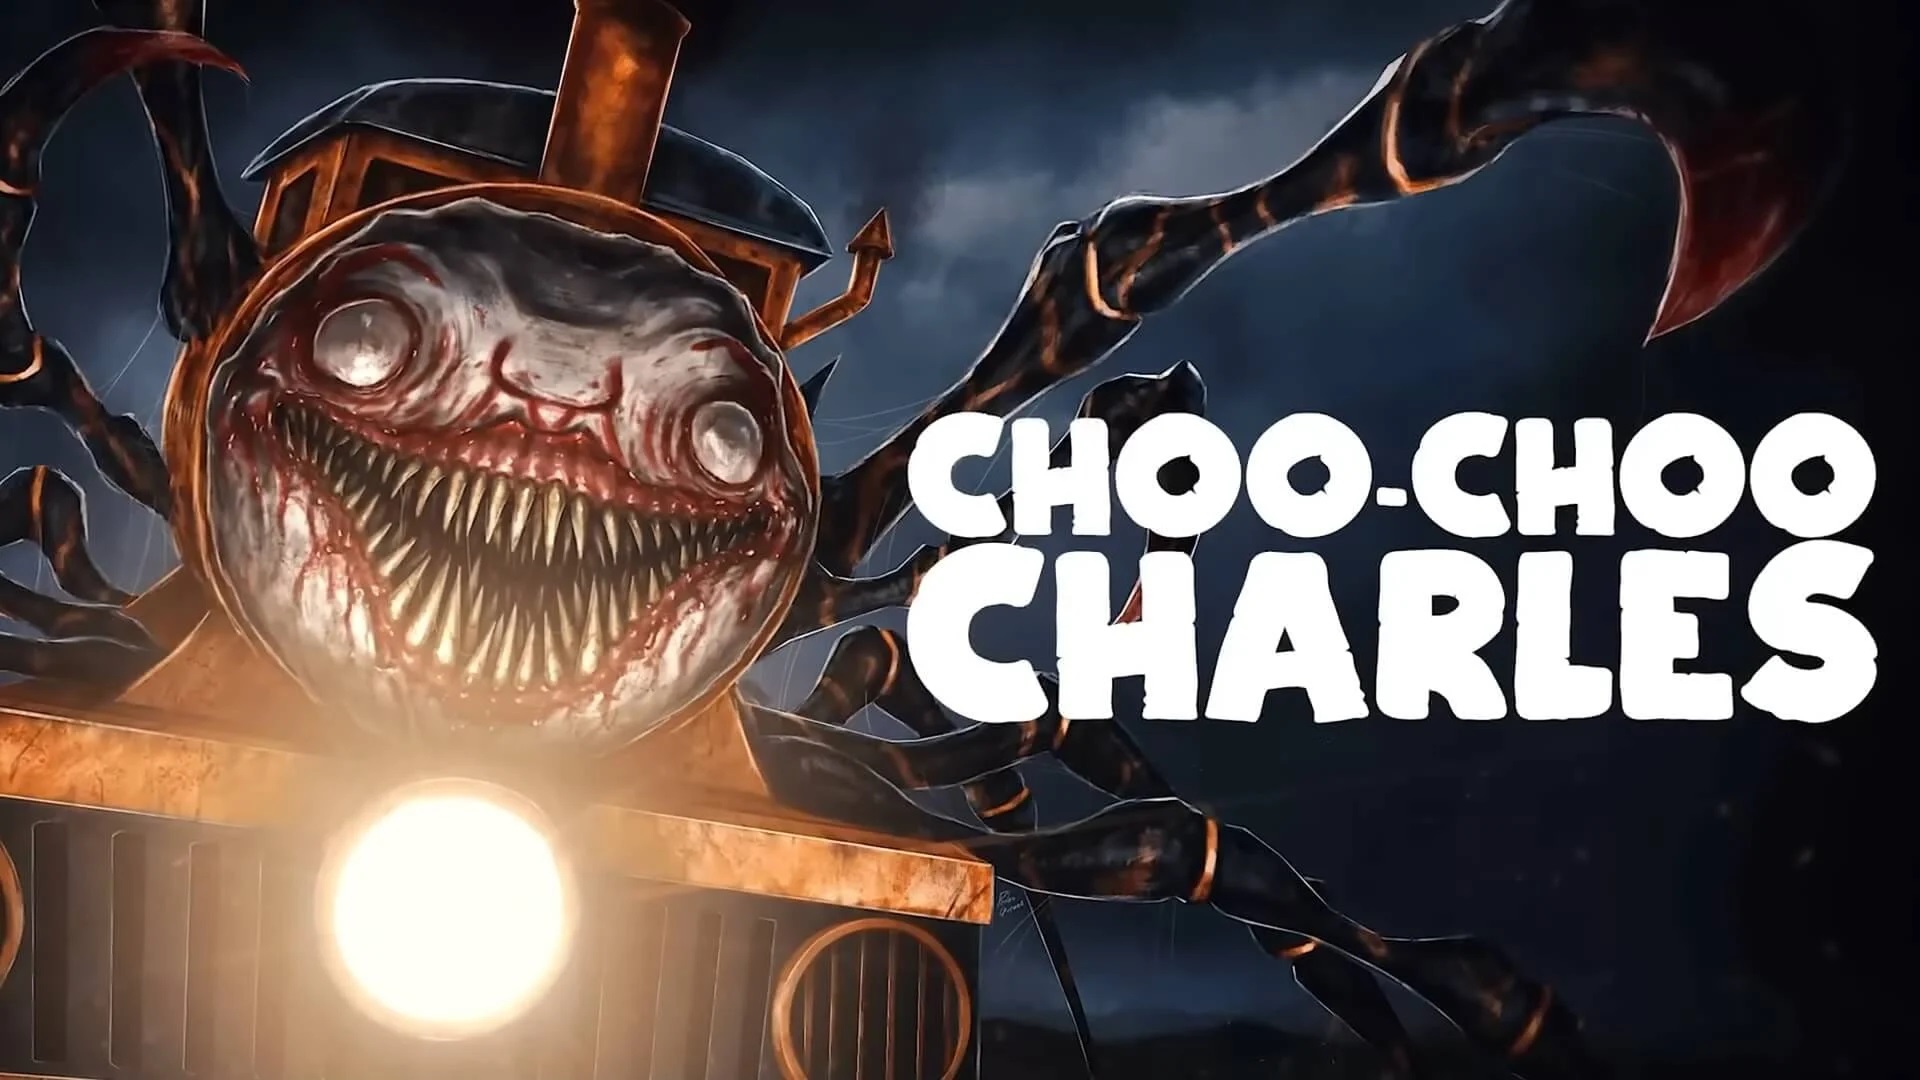 Choo-Choo Charles FULL GAME & ENDING - a Spider Train named Charles is  after you 